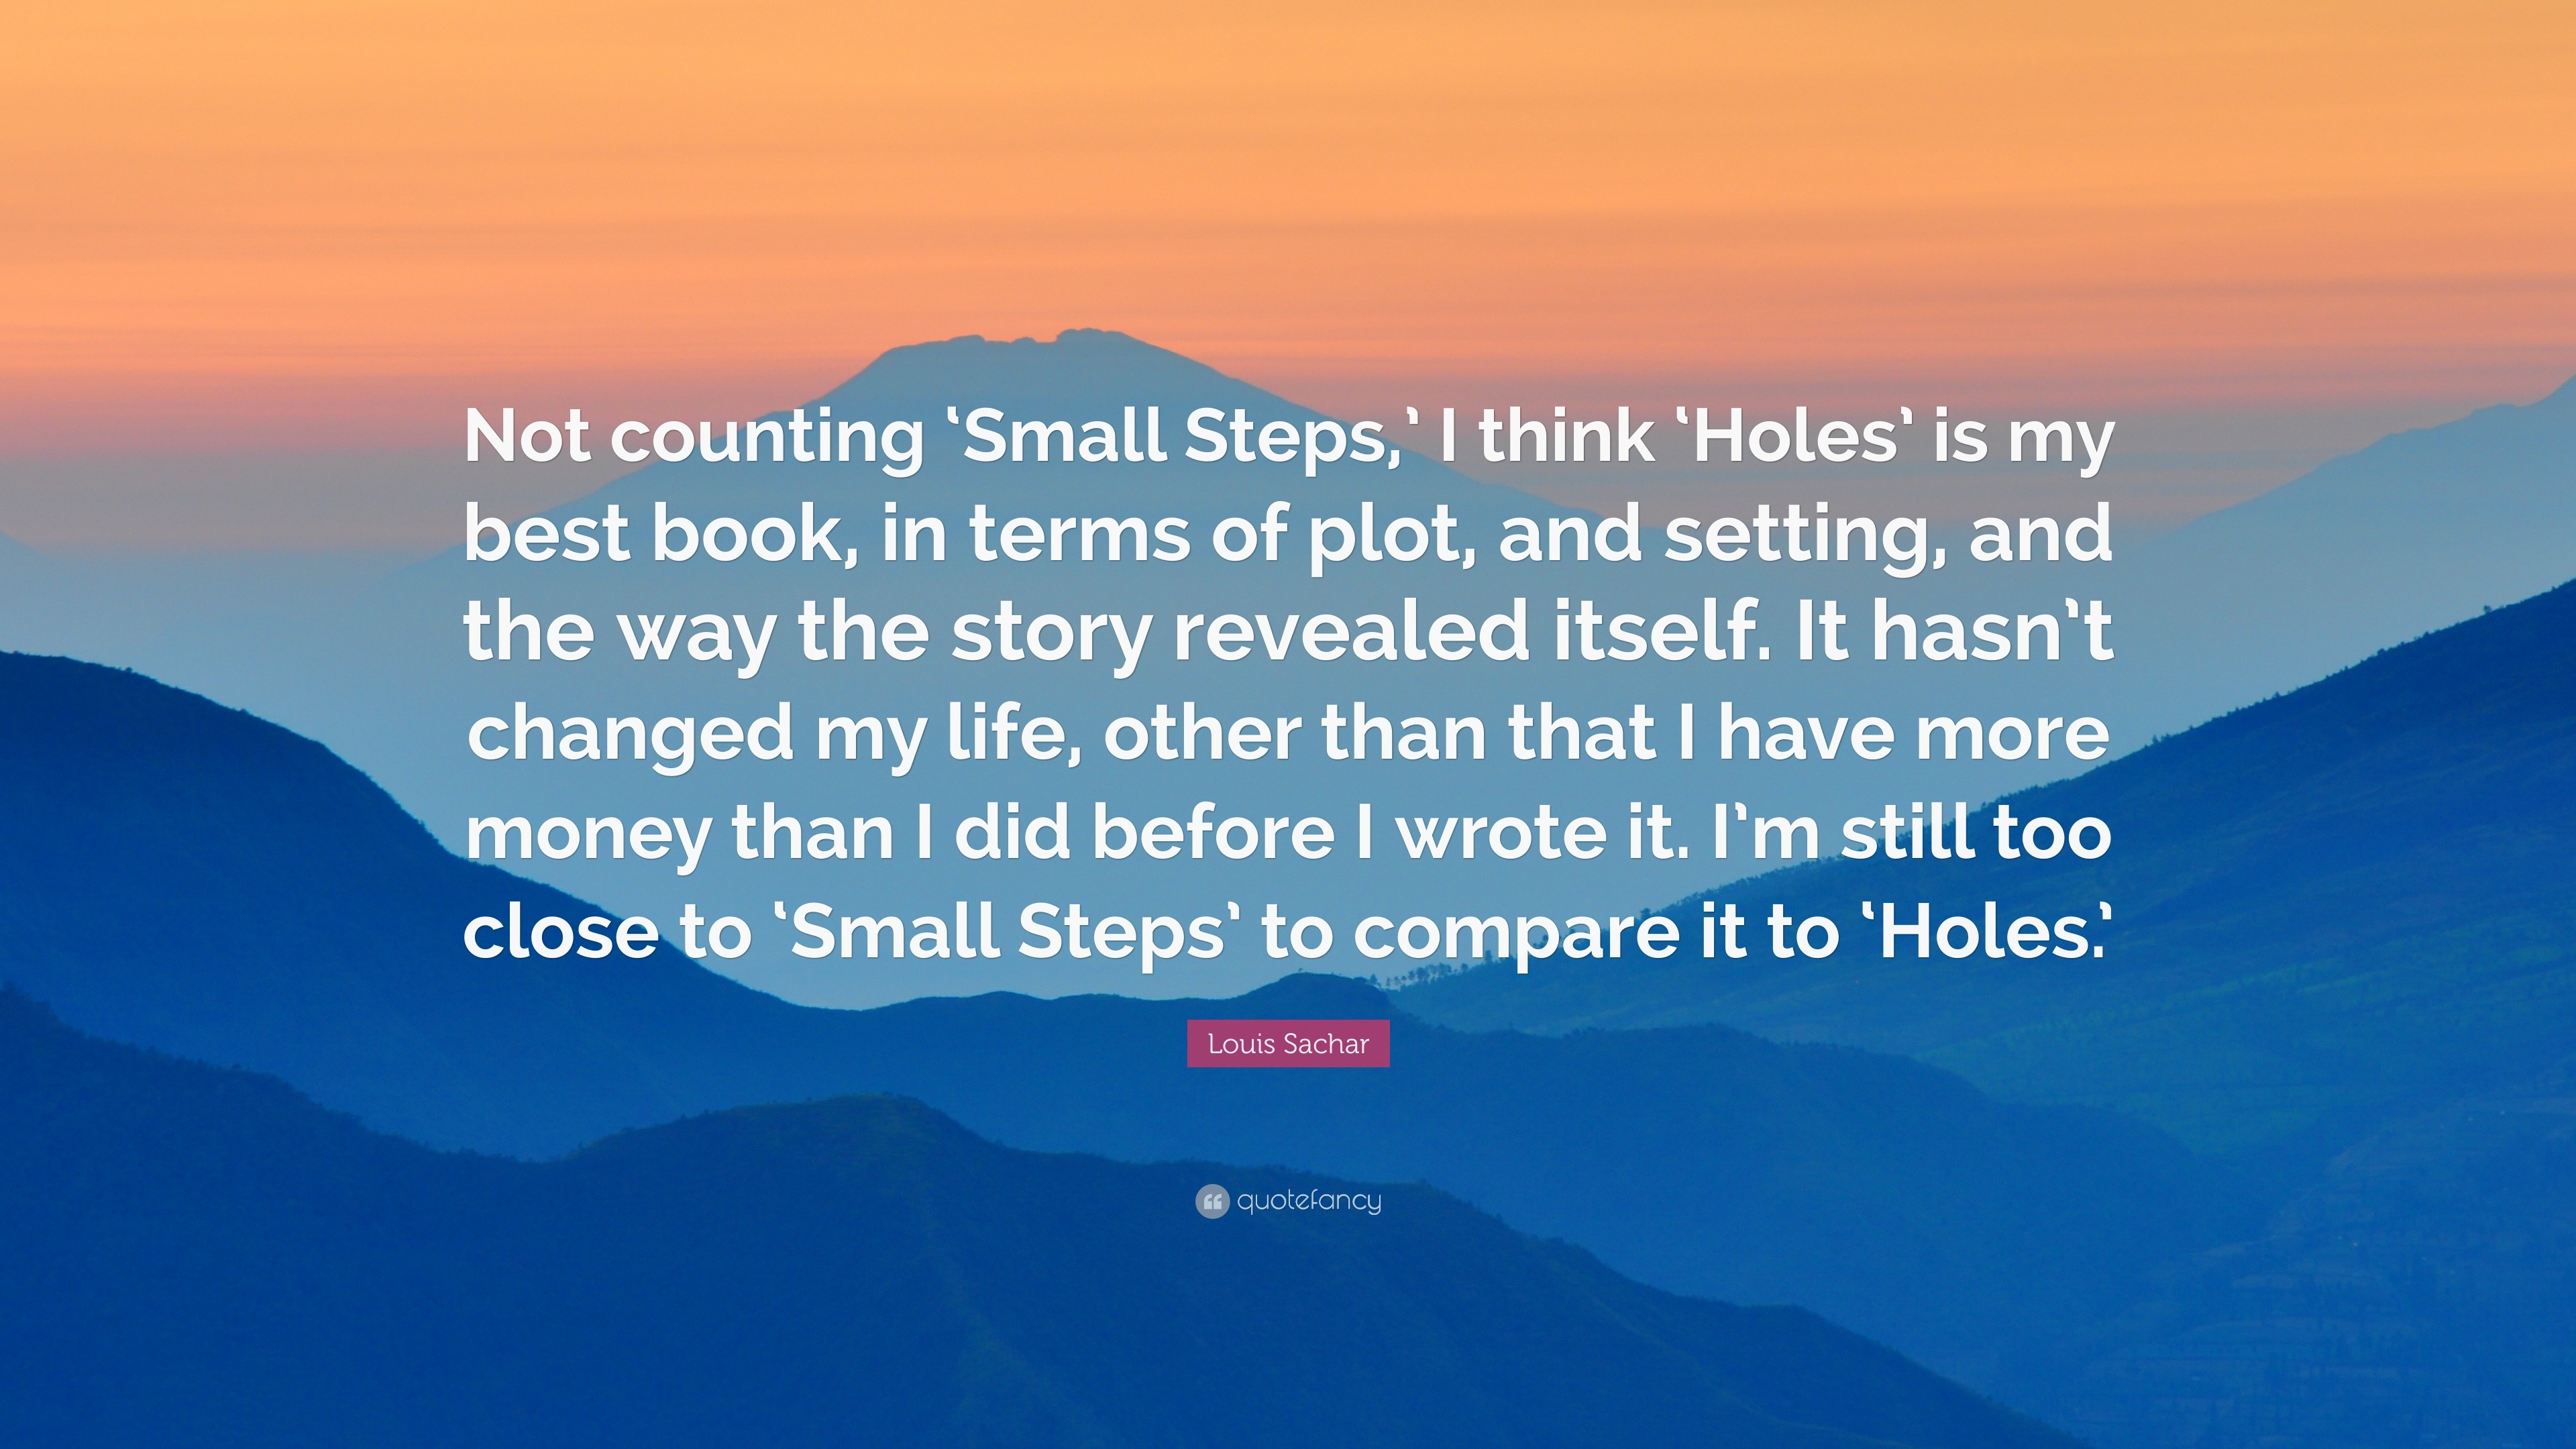 Louis Sachar Quote: “Not counting 'Small Steps,' I think 'Holes' is my best  book, in terms of plot, and setting, and the way the story reveal”